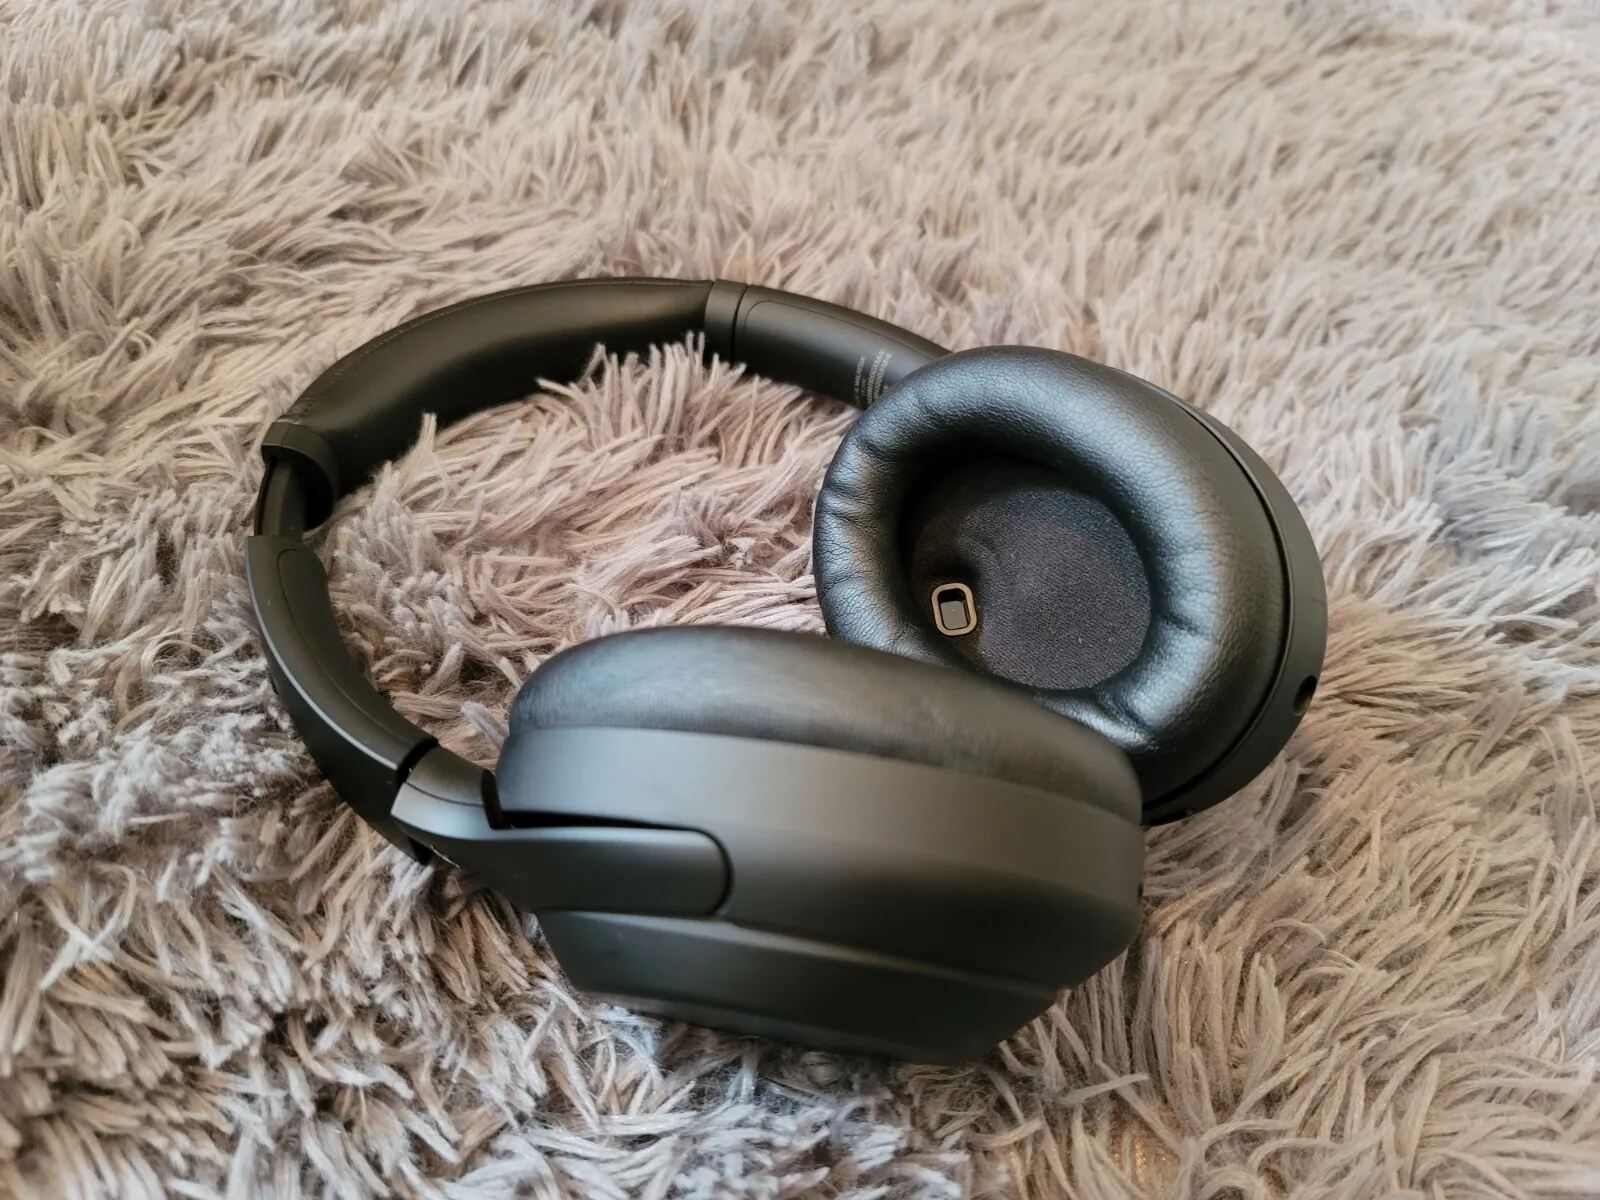 How To Turn On Noise Cancelling On Sony Wh-1000Xm4